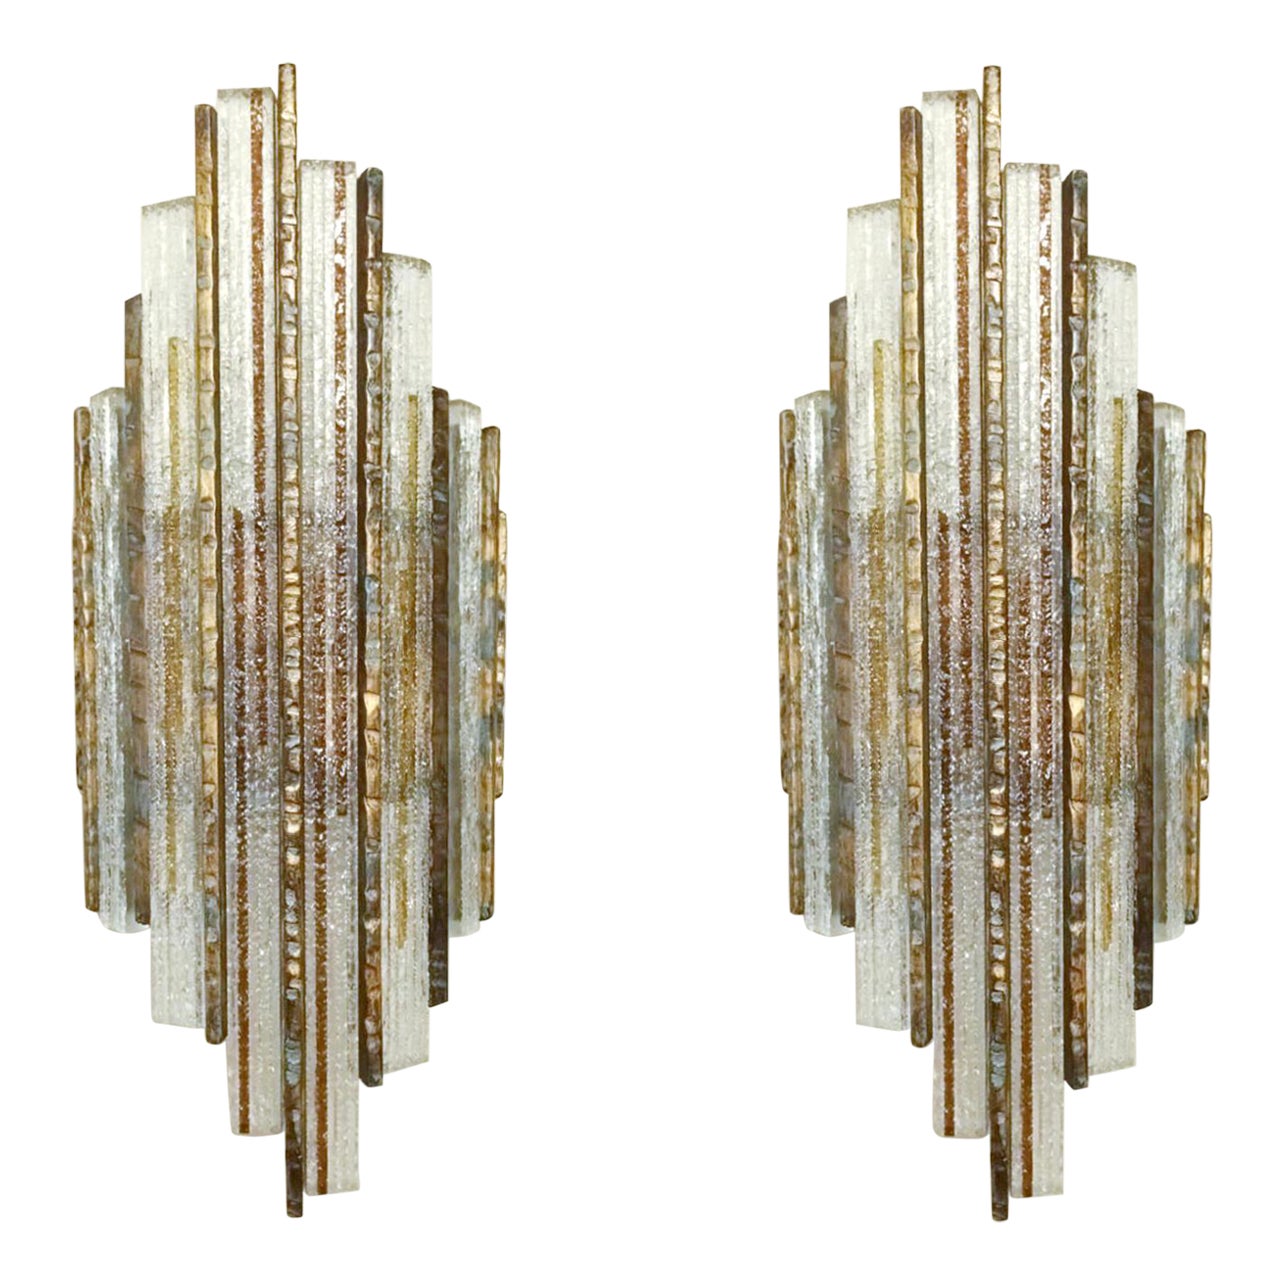 Pair of Brutalist Sconces by Marino Poccetti